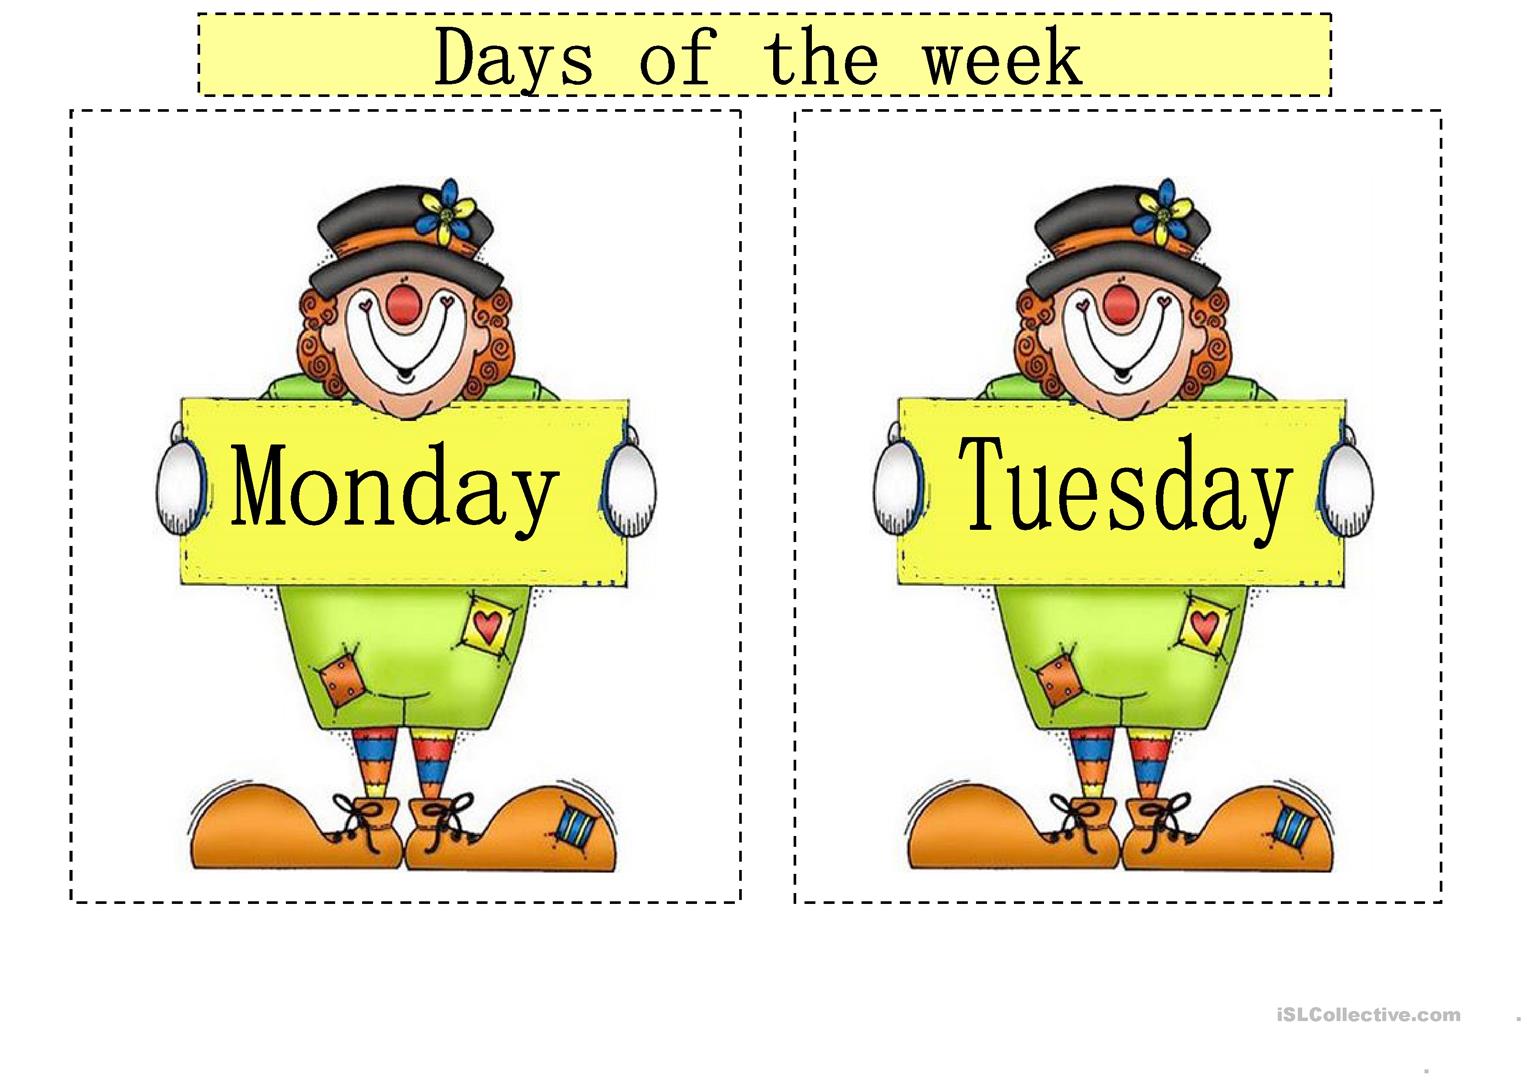 Days of the week for kids song. Days of the week ISLCOLLECTIVE. Monday week. Days of the week ISLCOLLECTIVE com.